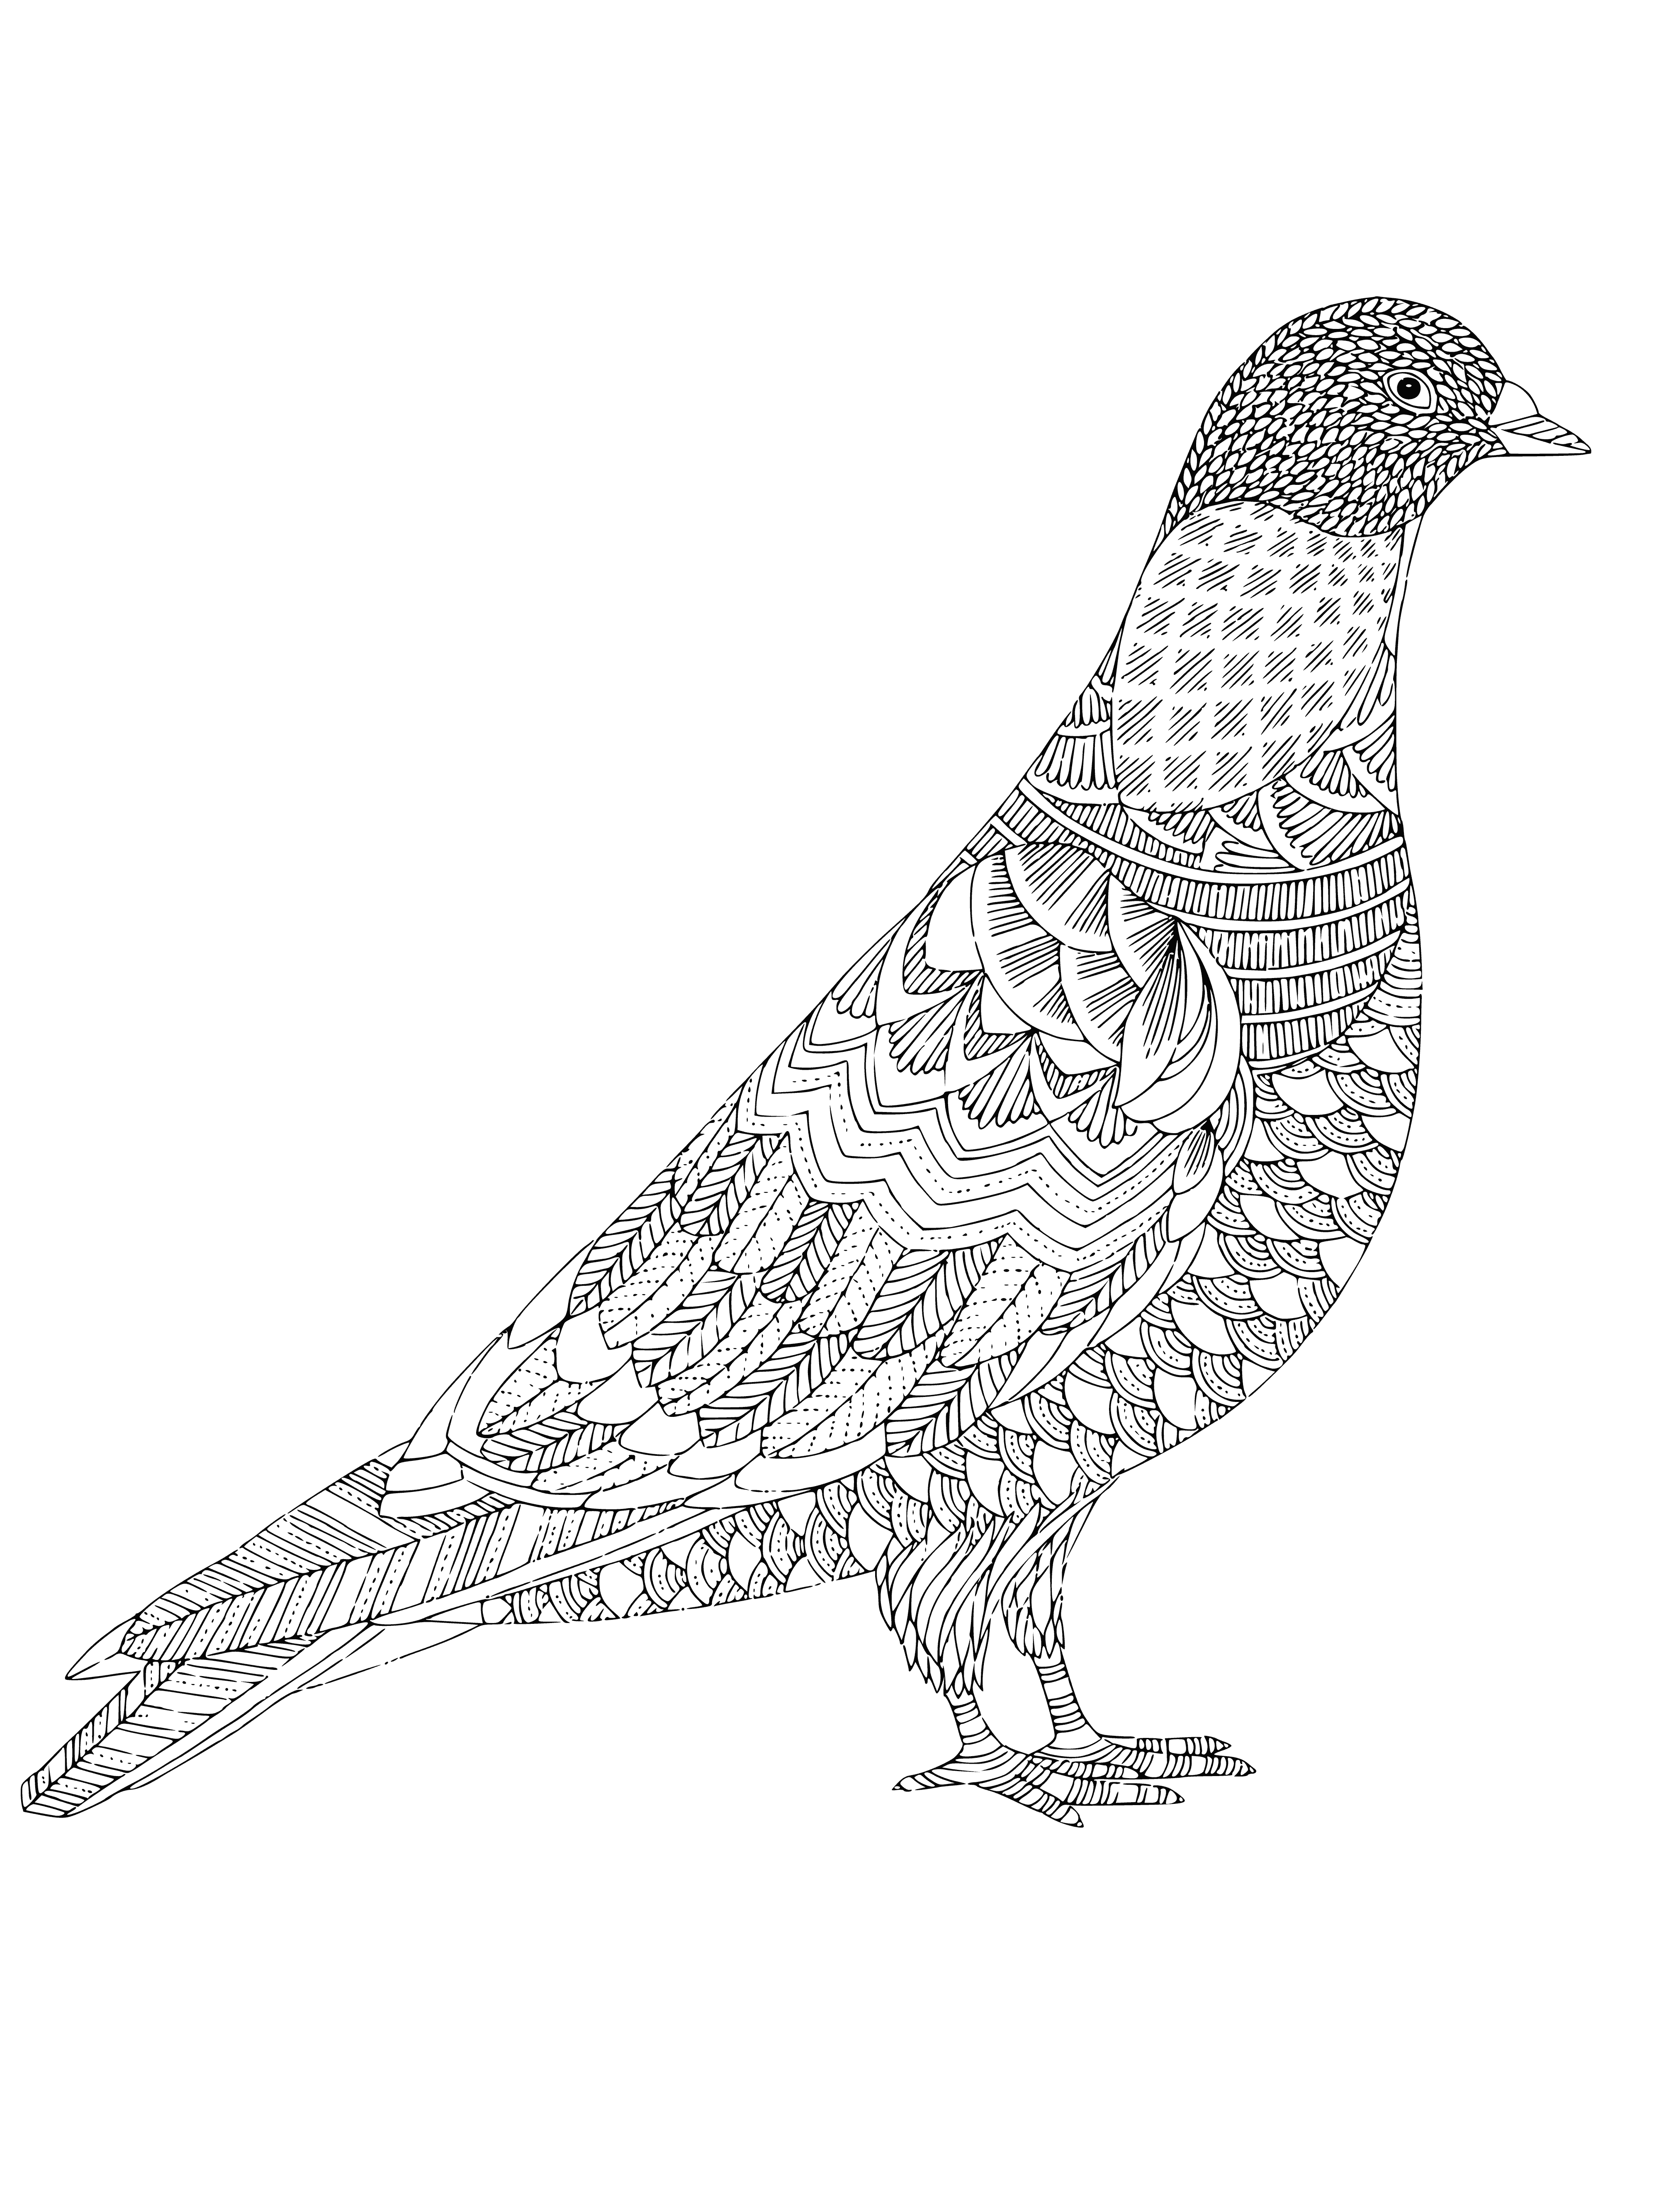 coloring page: Pigeon basks on power line, relaxed, gray body, darker wings, eyes closed, appreciating the world below.